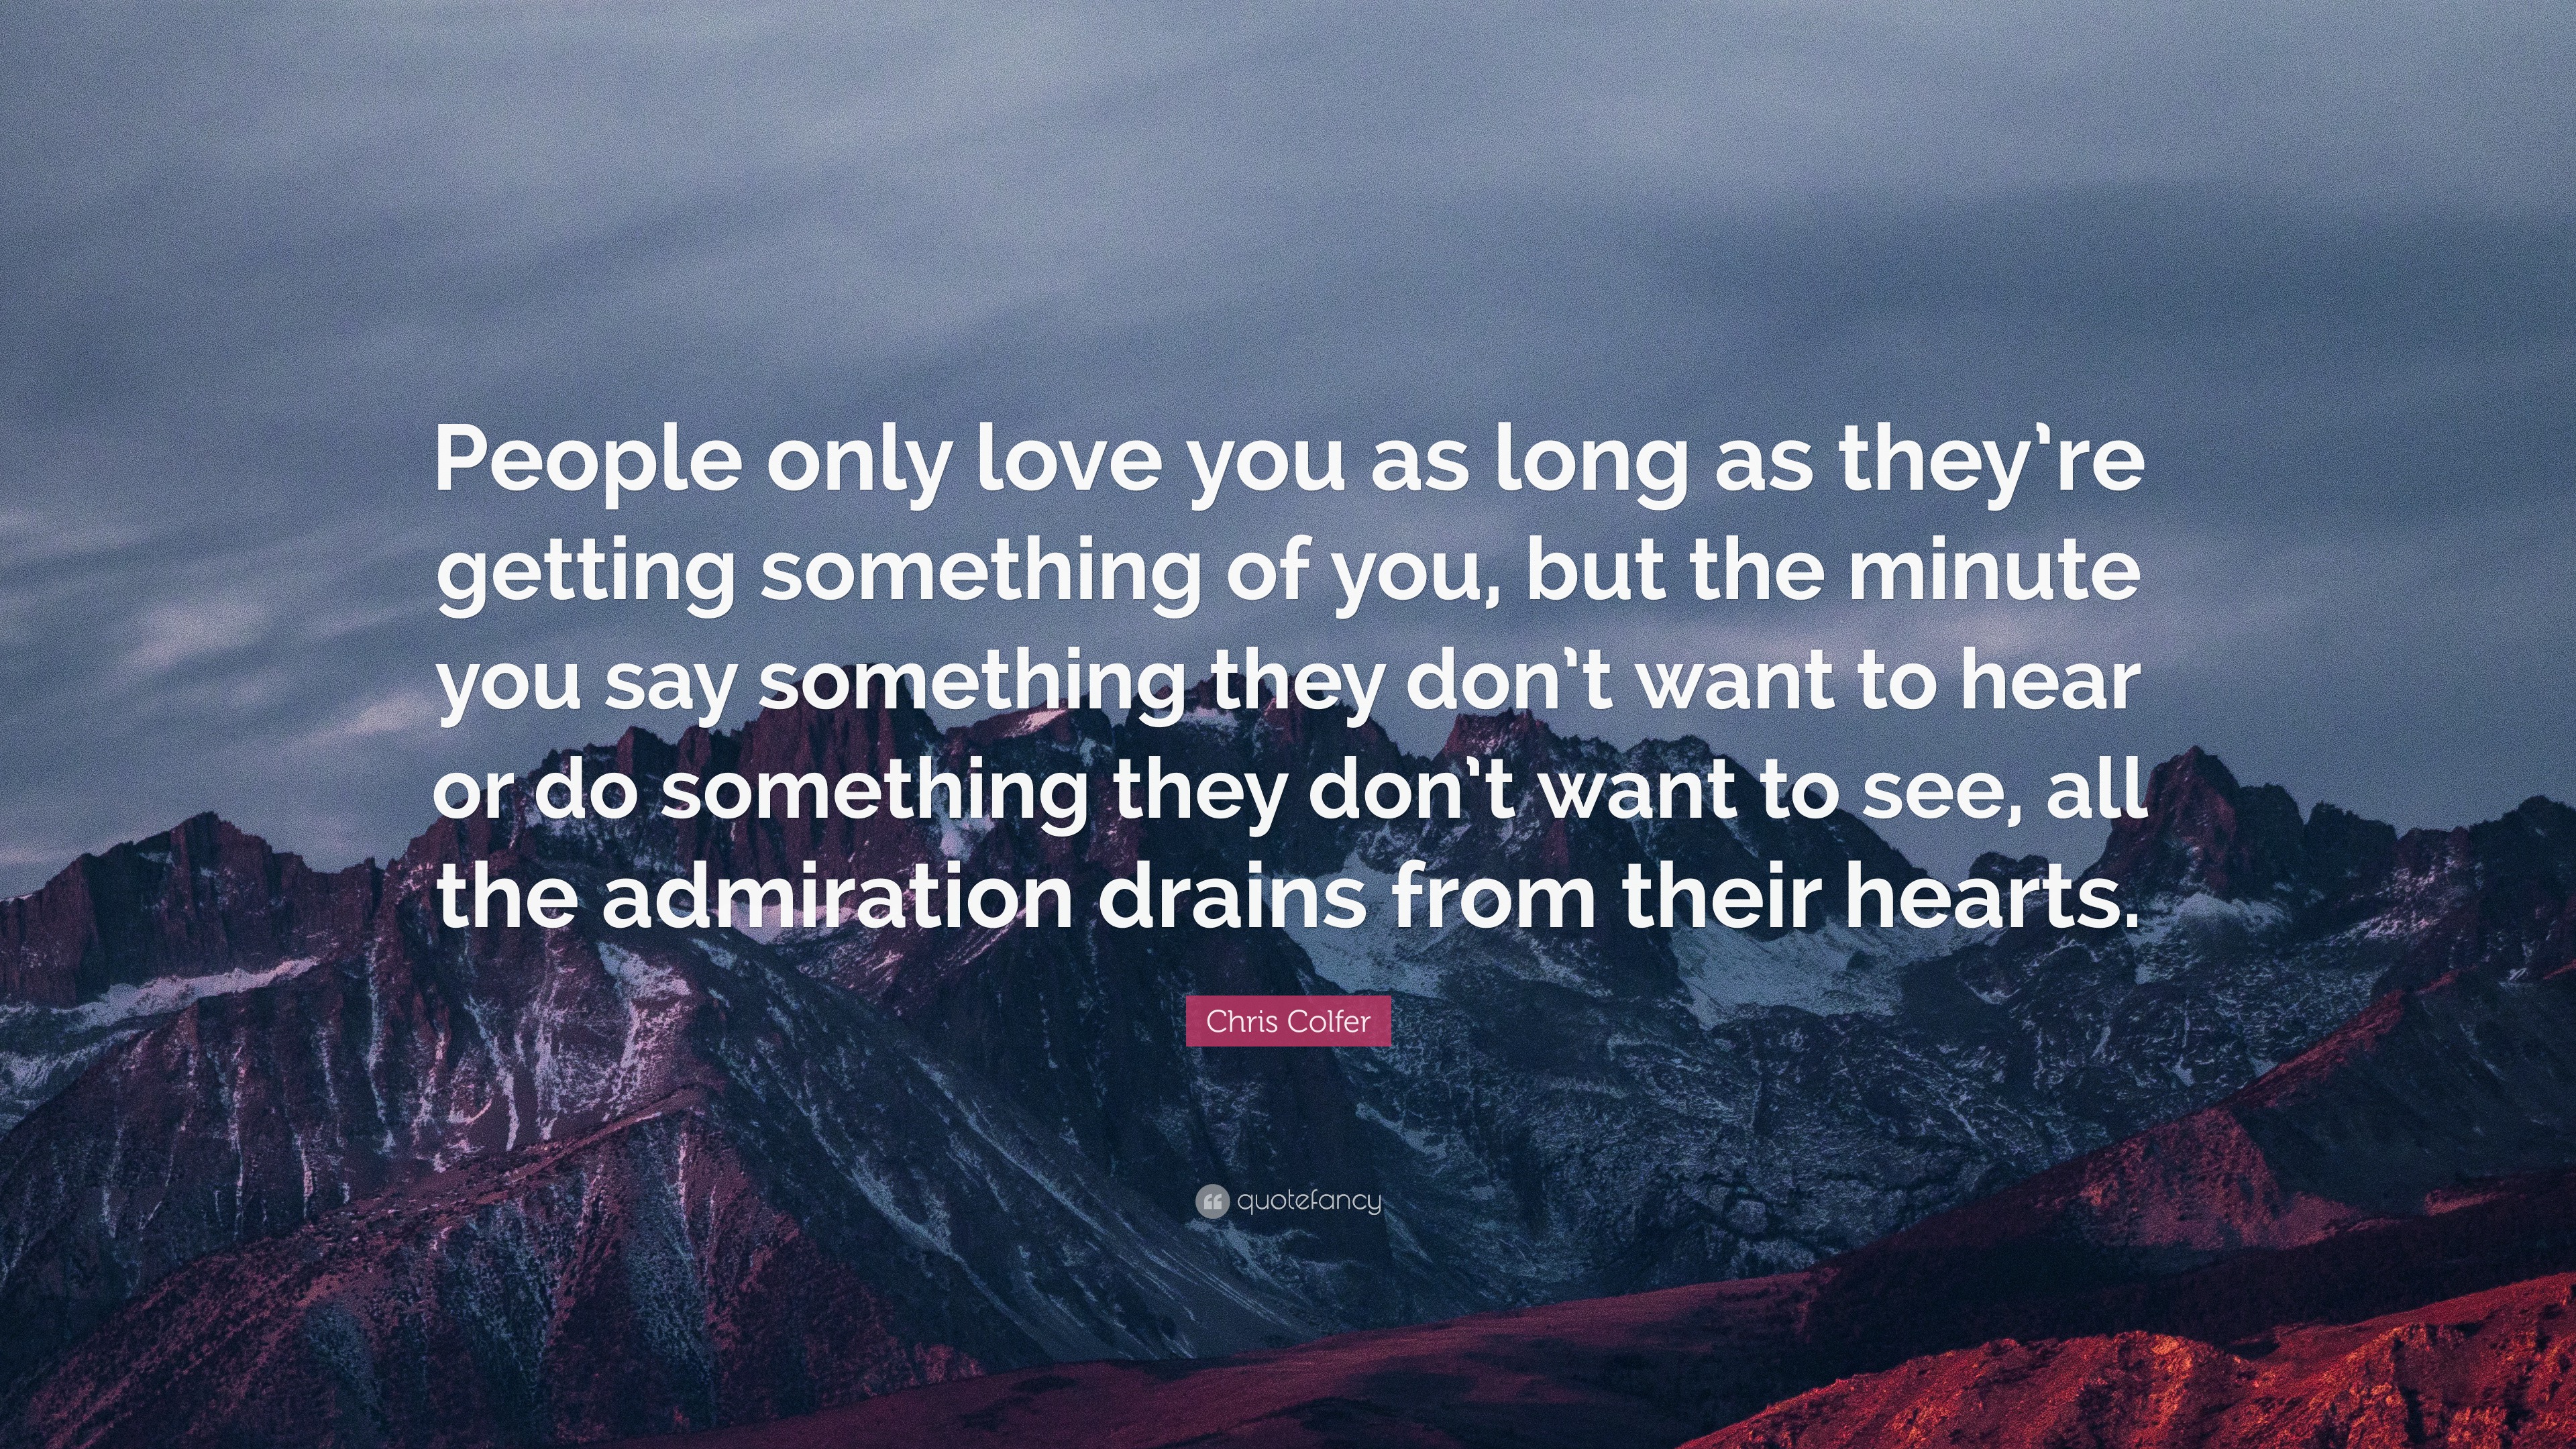 Chris Colfer Quote: “People only love you as long as they’re getting ...